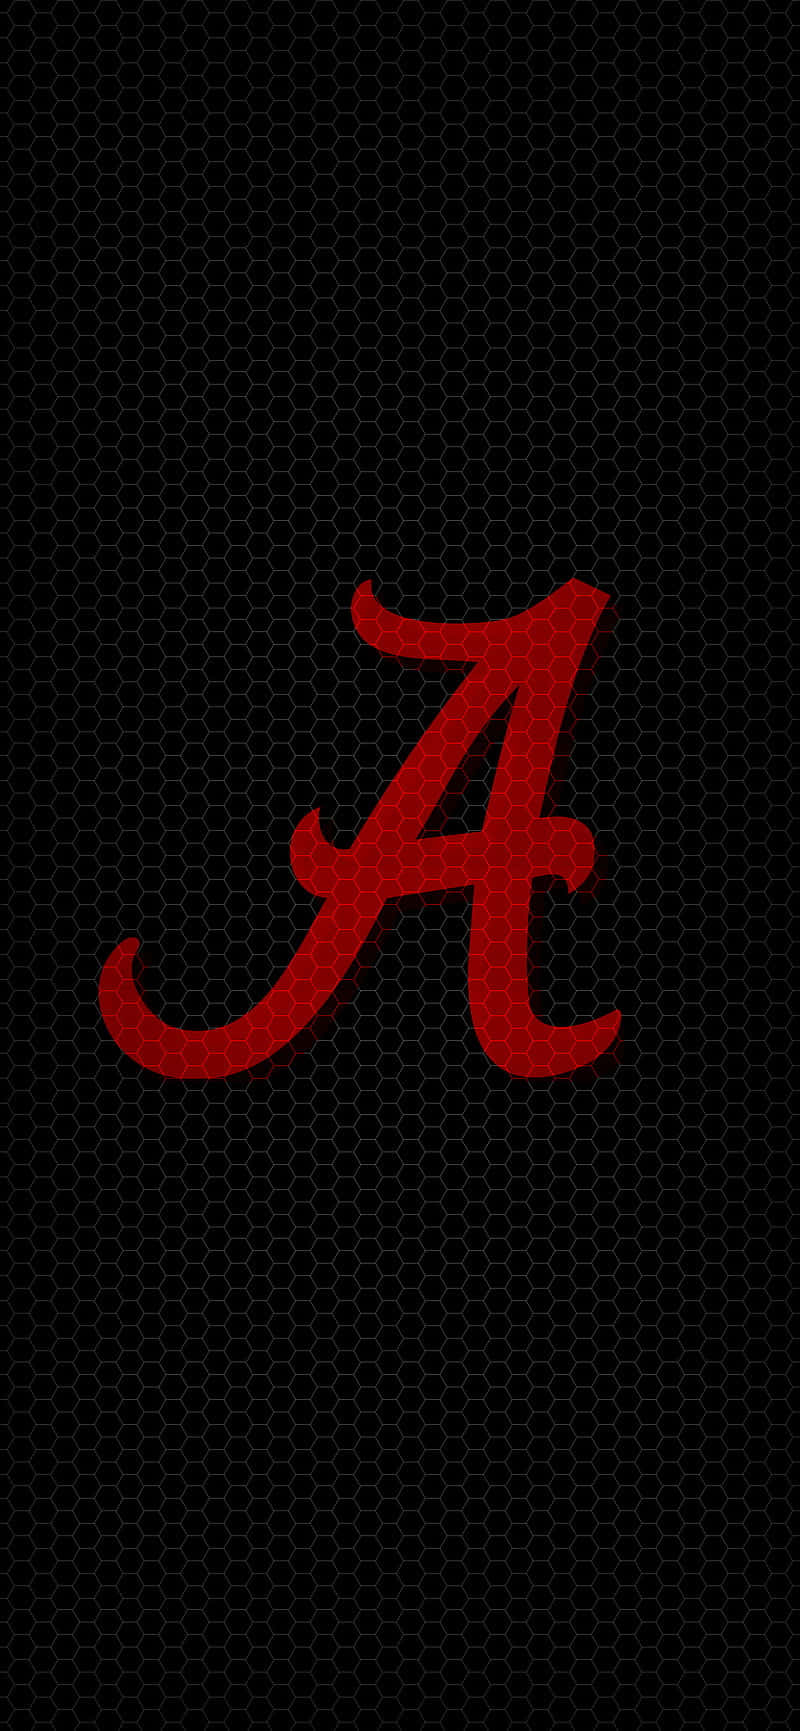 Get ready for game day with the Alabama Crimson Tide Football app for your iPhone. Wallpaper